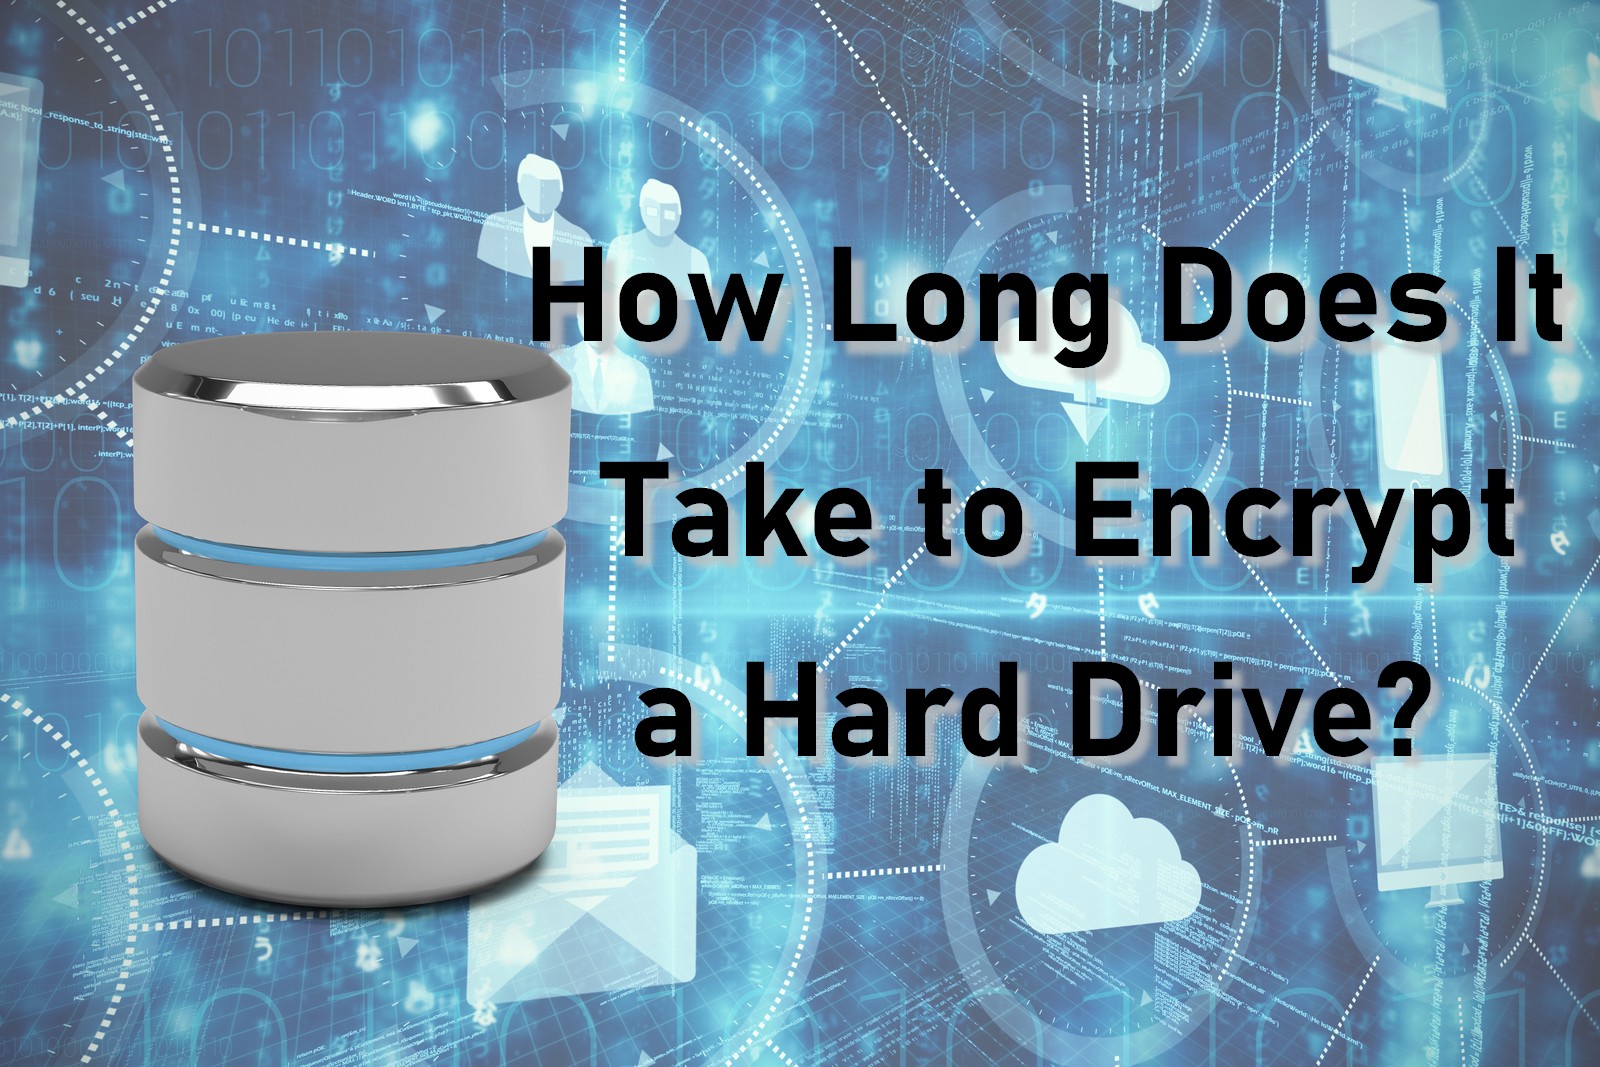 How Long Does It Take to Encrypt a Hard Drive